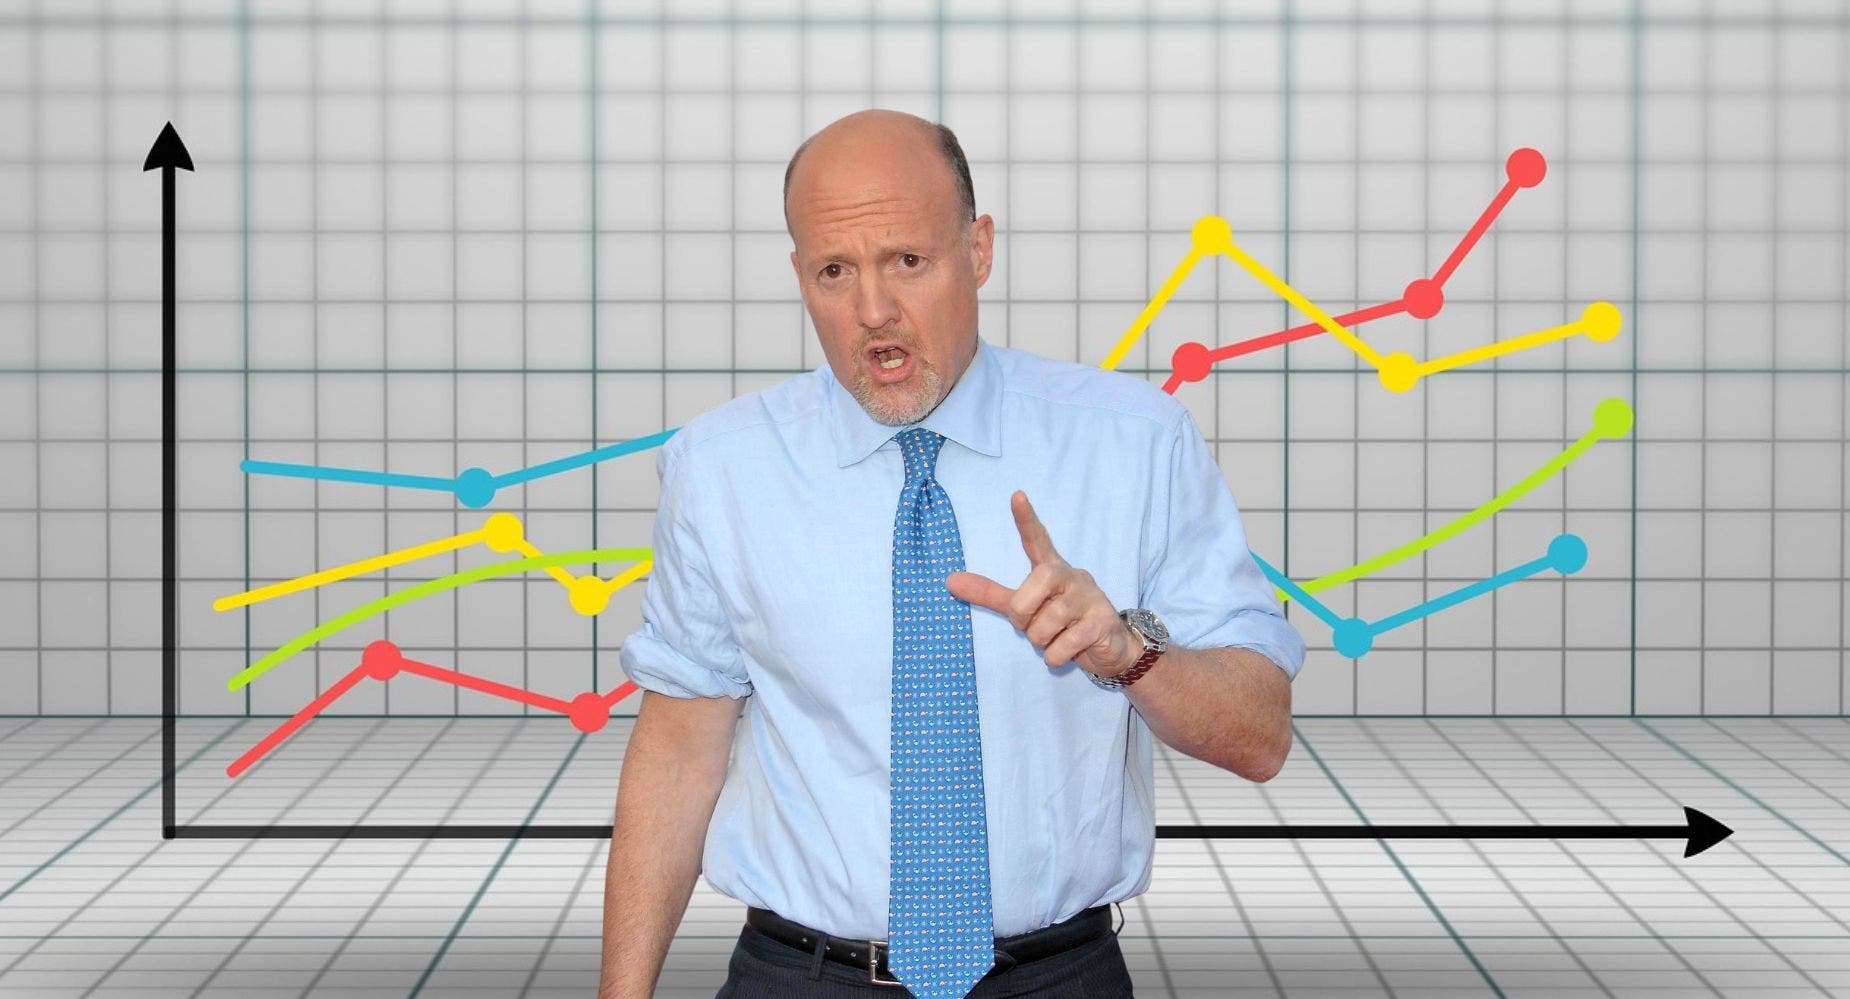 Jim Cramer Says Don't Be Tempted To Buy This Tech Stock Down 46%: 'It's Just Too Risky'